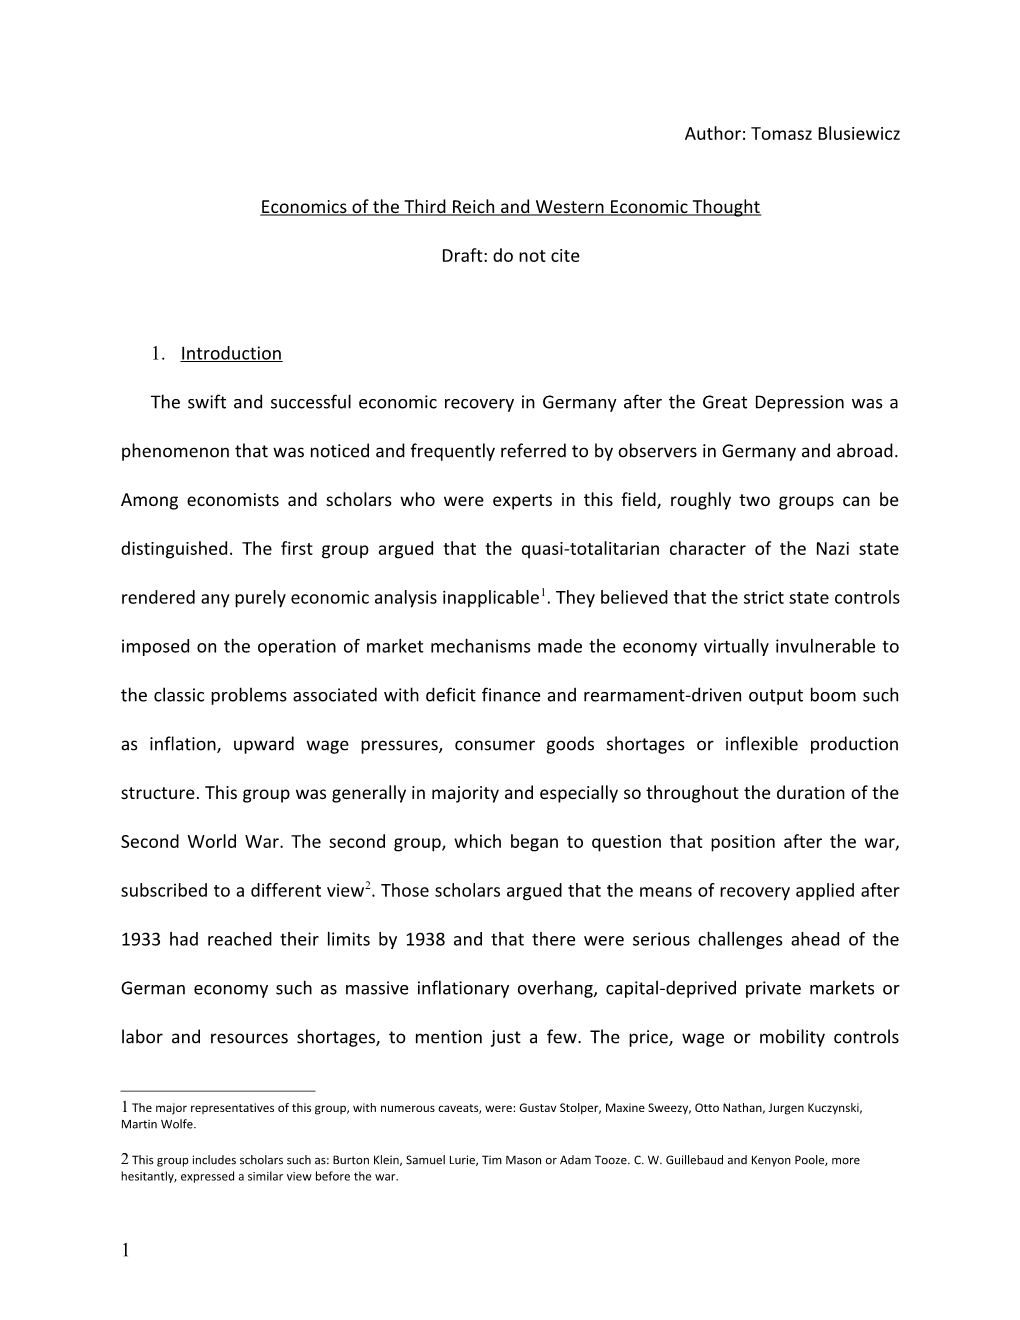 Economics of the Third Reich and Western Economic Thought